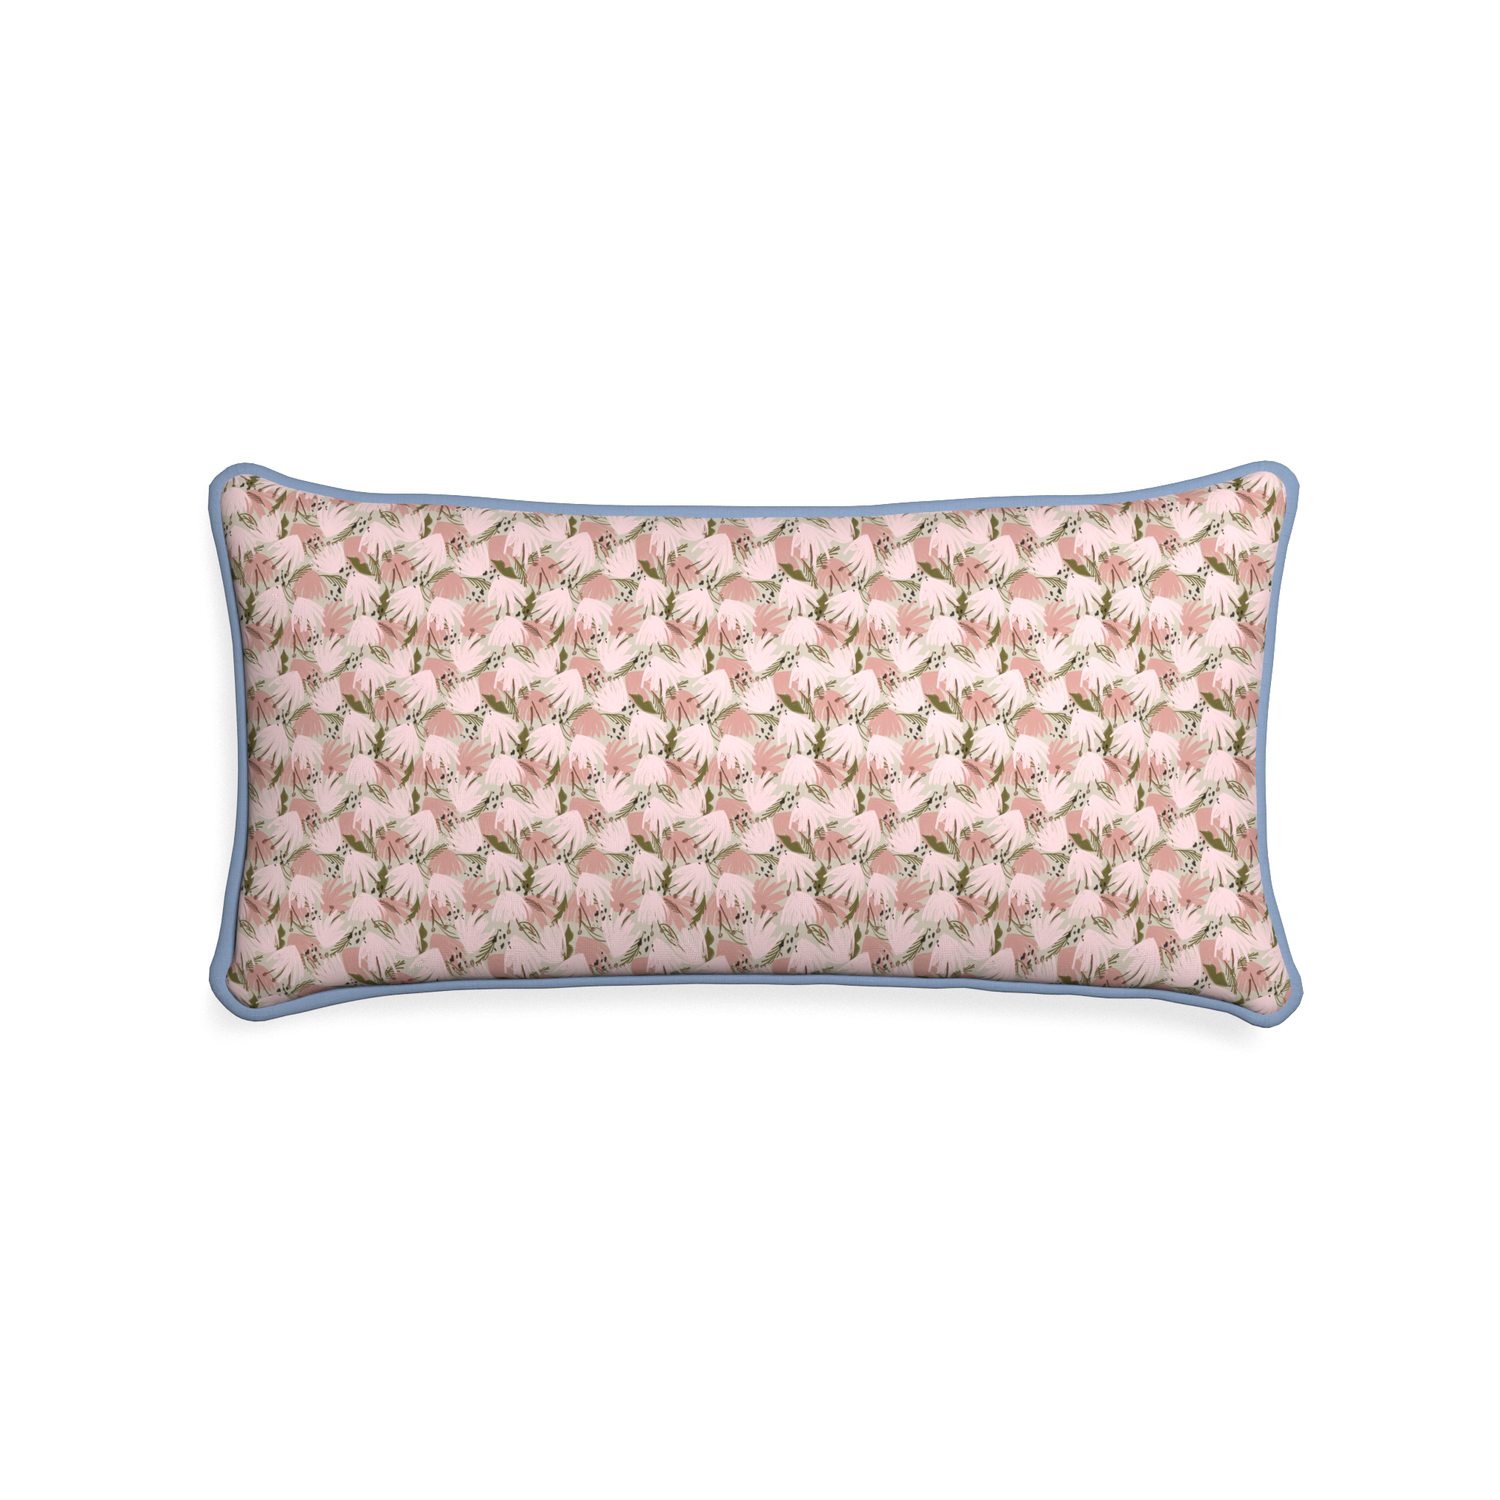 Midi-lumbar eden pink custom pink floralpillow with sky piping on white background